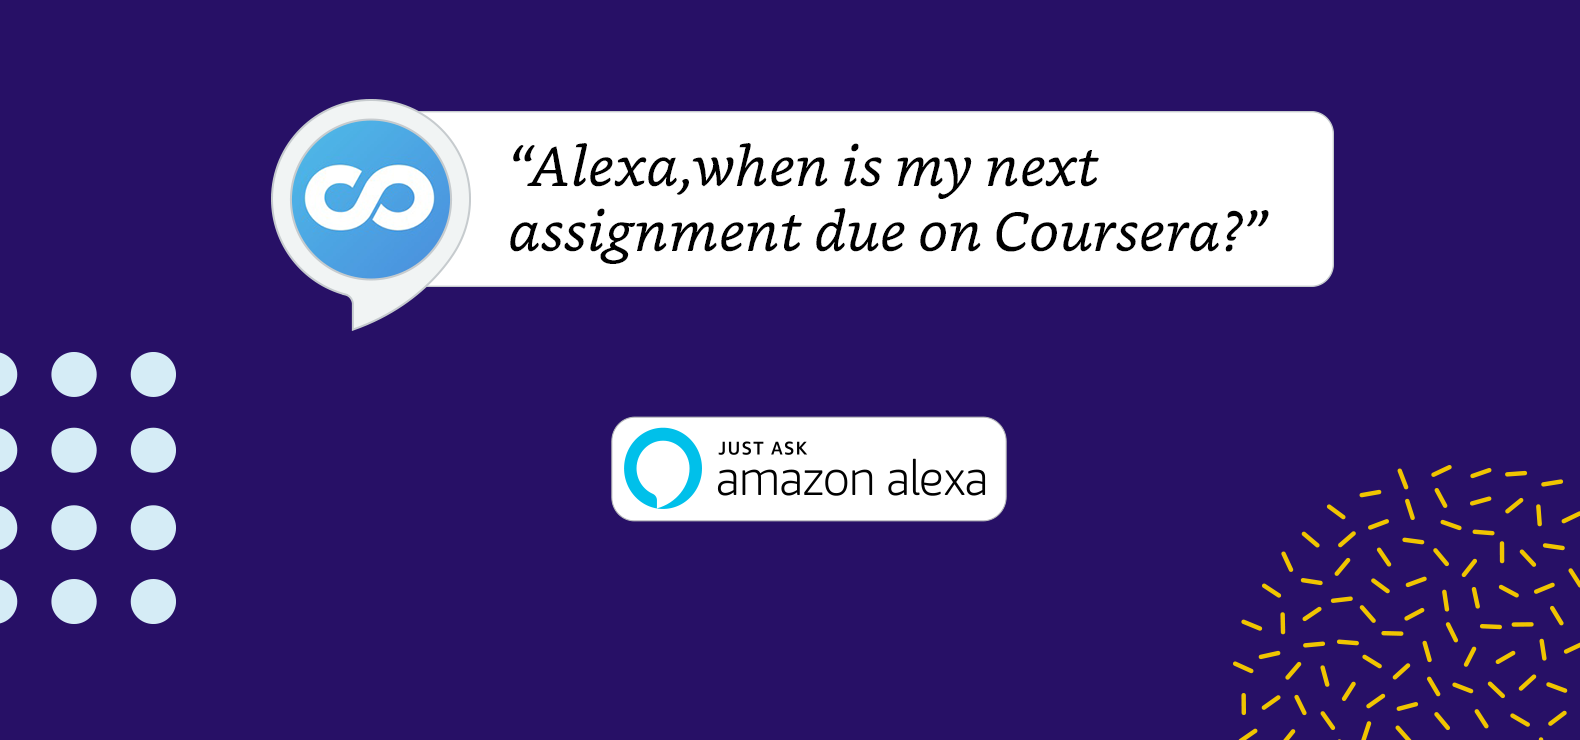 Coursera Introduces Amazon Alexa Skill to Support Learning Goals